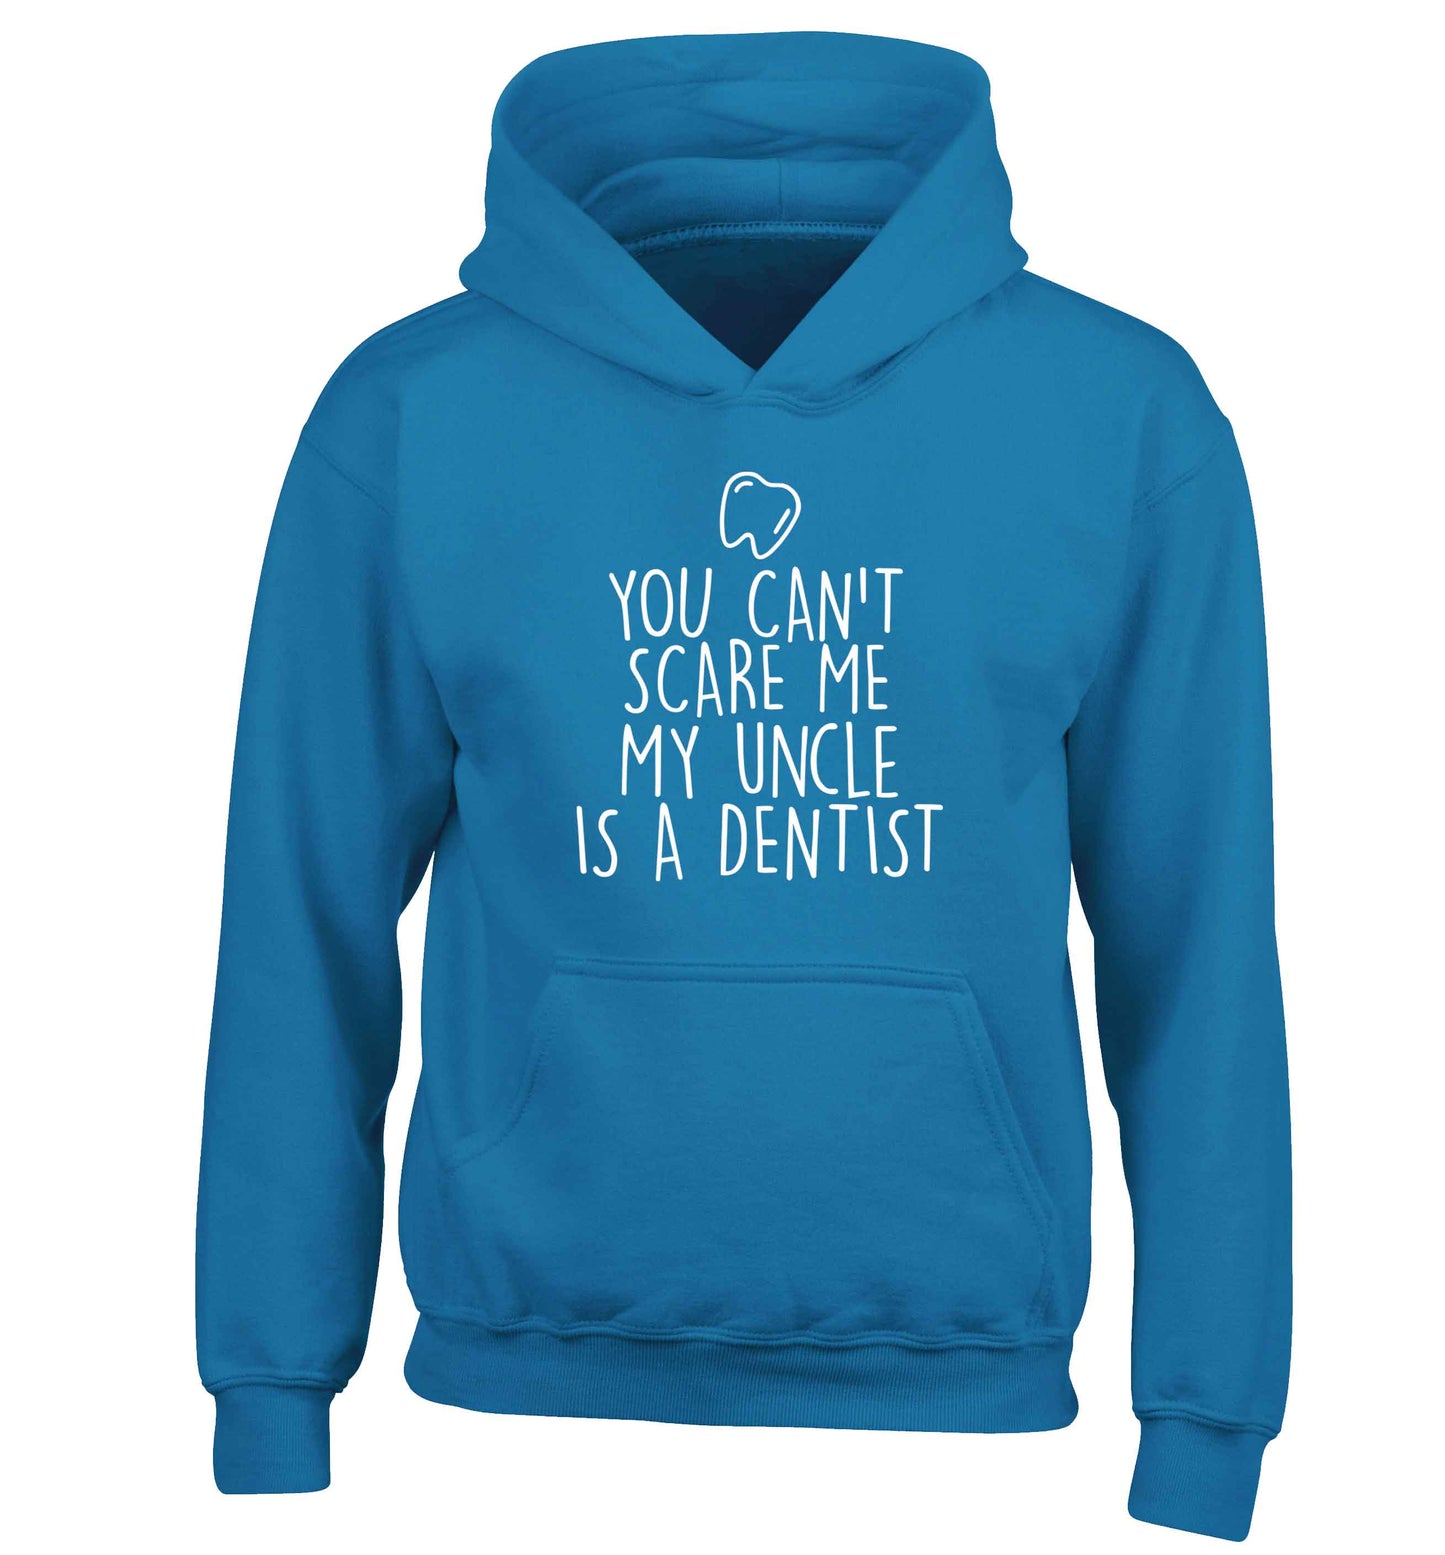 You can't scare me my uncle is a dentist children's blue hoodie 12-13 Years